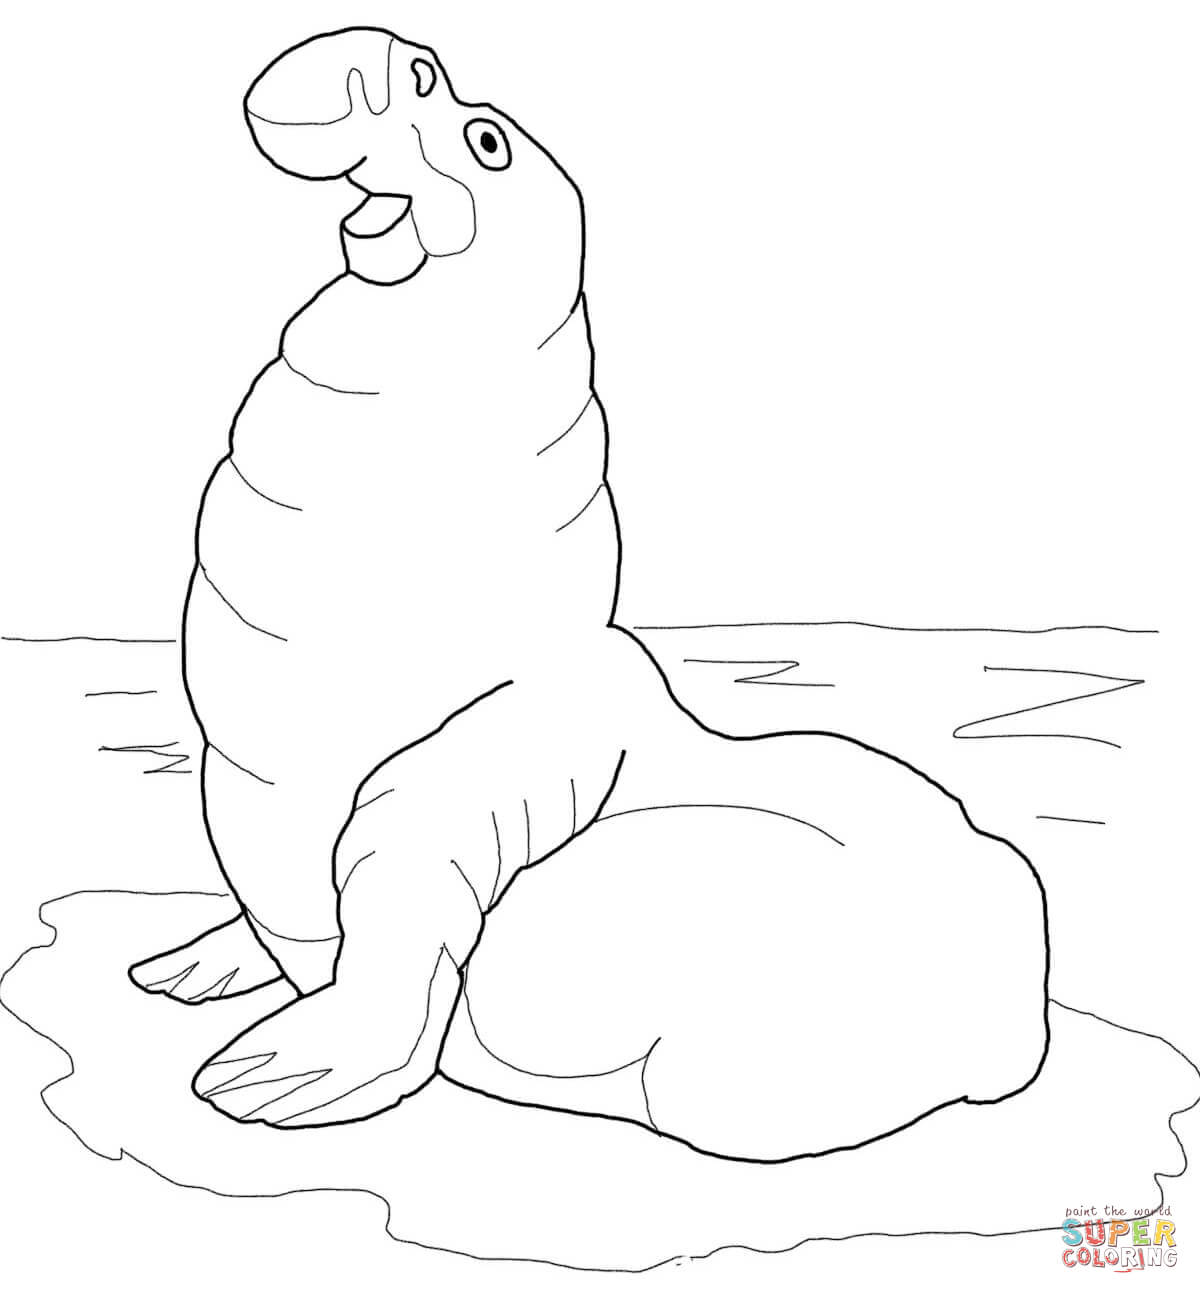 Seals coloring pages | Free Coloring Pages